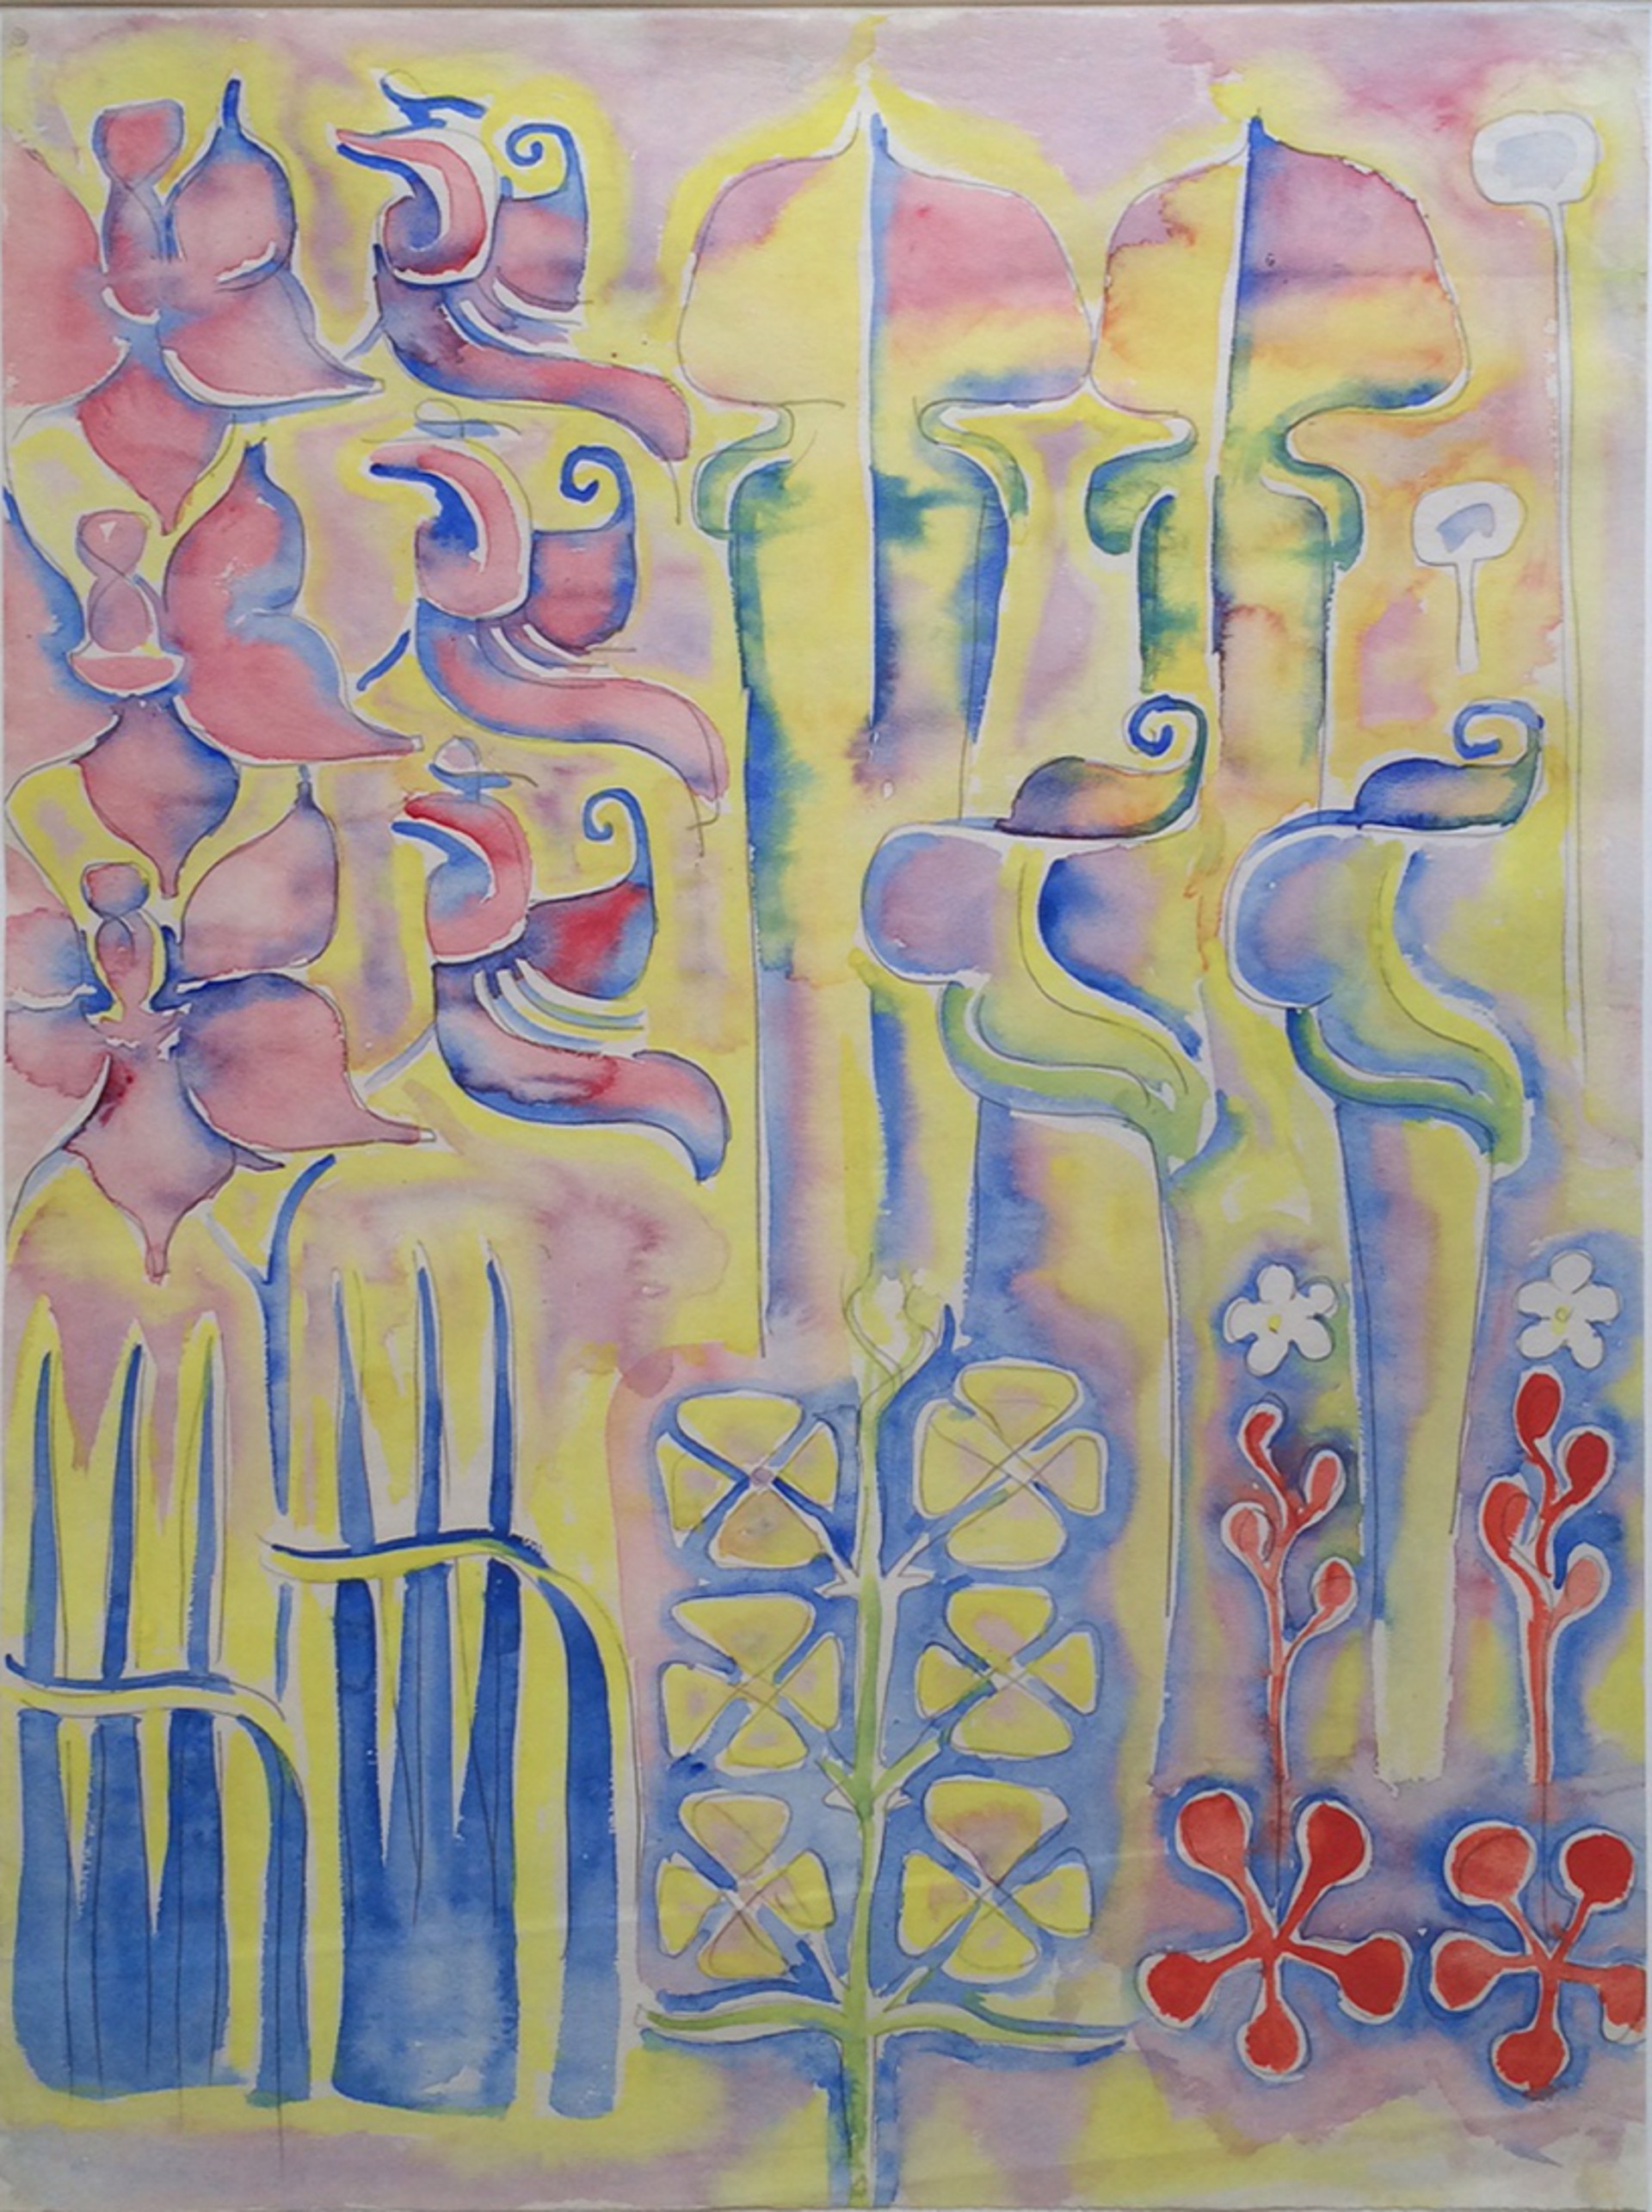 Pitcher Plants by Walter Anderson